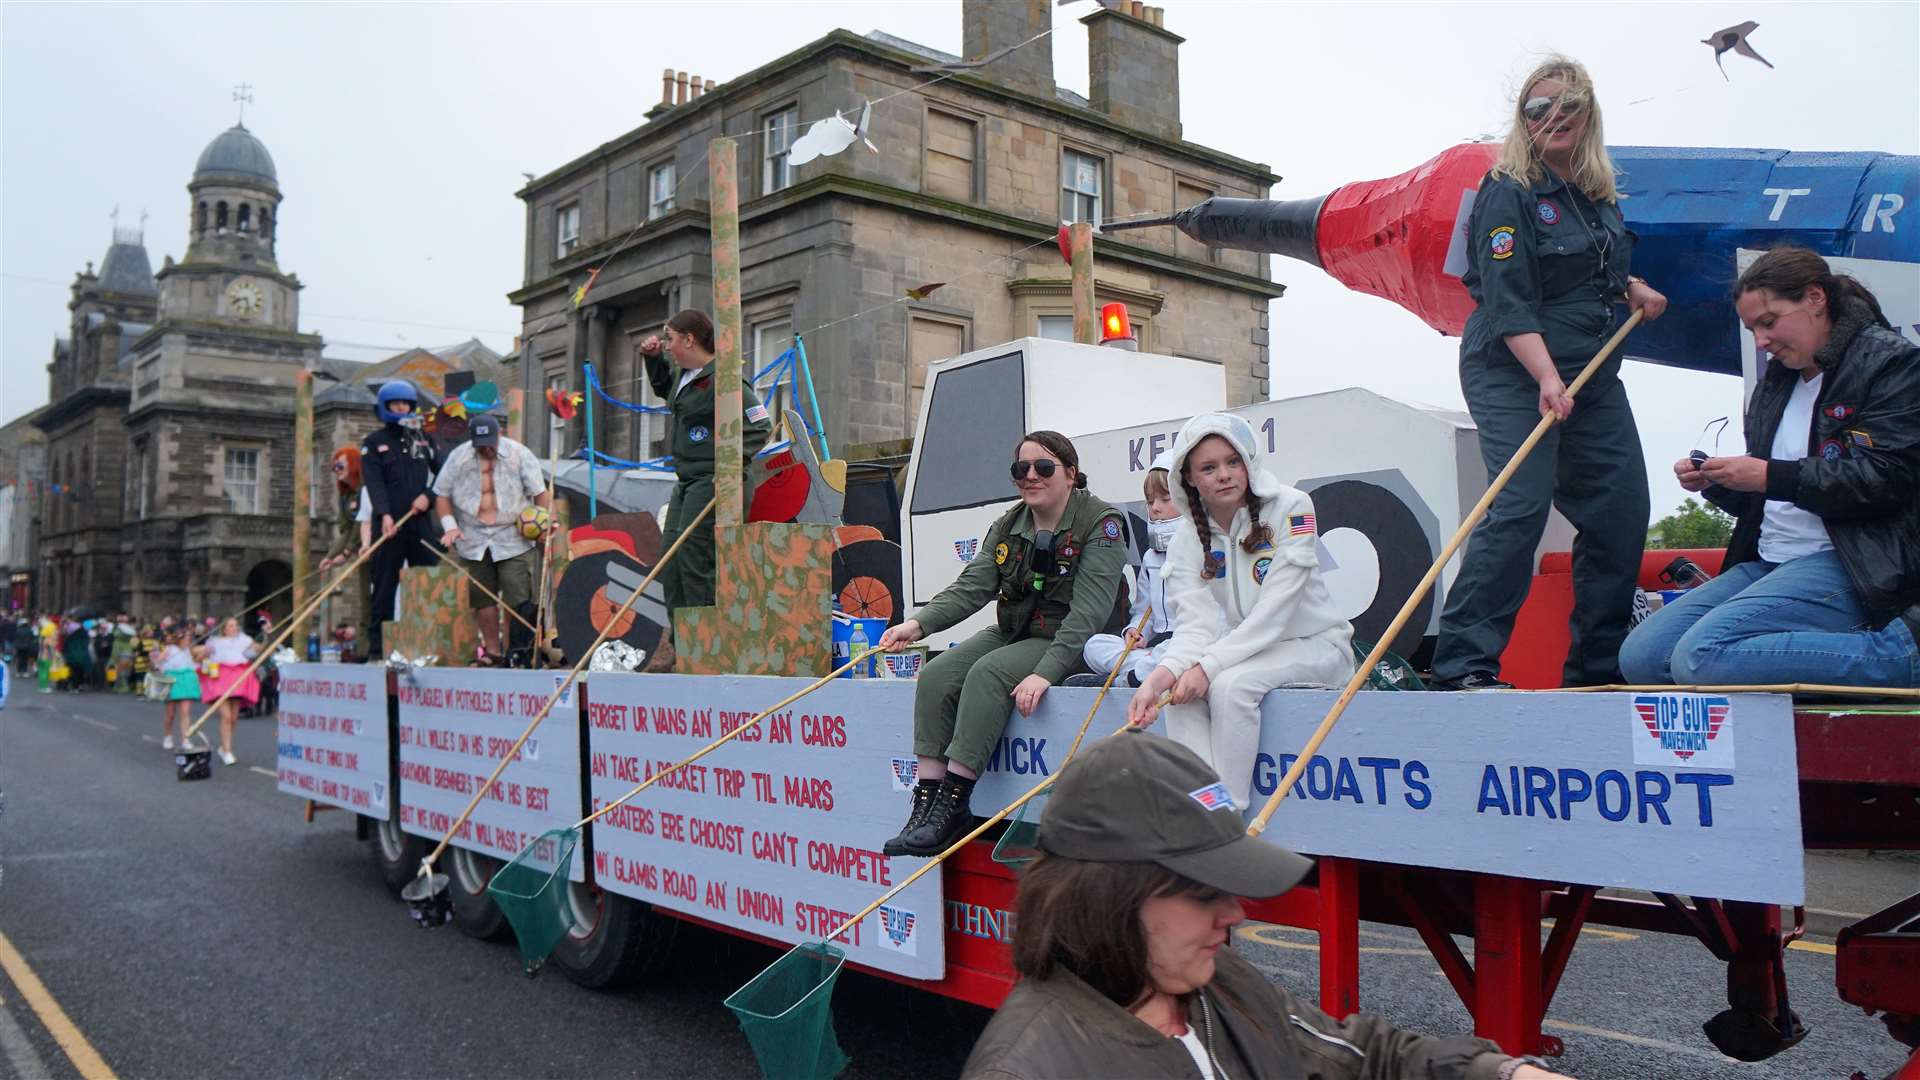 Procession of floats and fancy dress for Wick Gala Week 2022. Picture: DGS